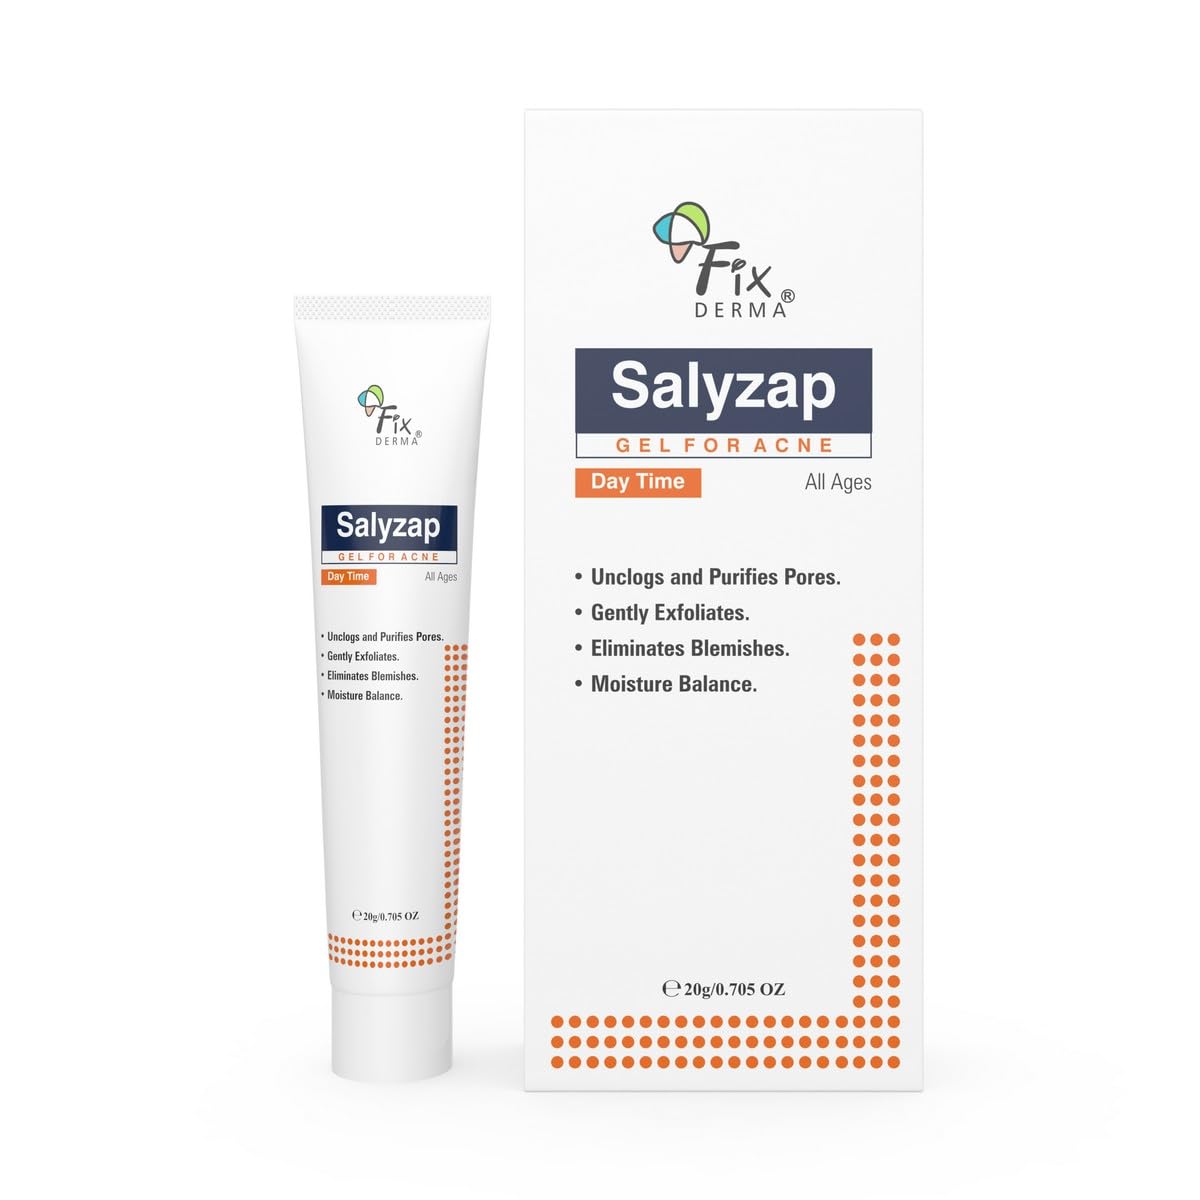 FIXDERMA 2% Salicylic Acid Salyzap Gel for Acne | Dead Skin Remover for Face | Day Time Gel for Acne Scars & Pimples | Face Moisturizer | Acne Treatment for Face - 0.70